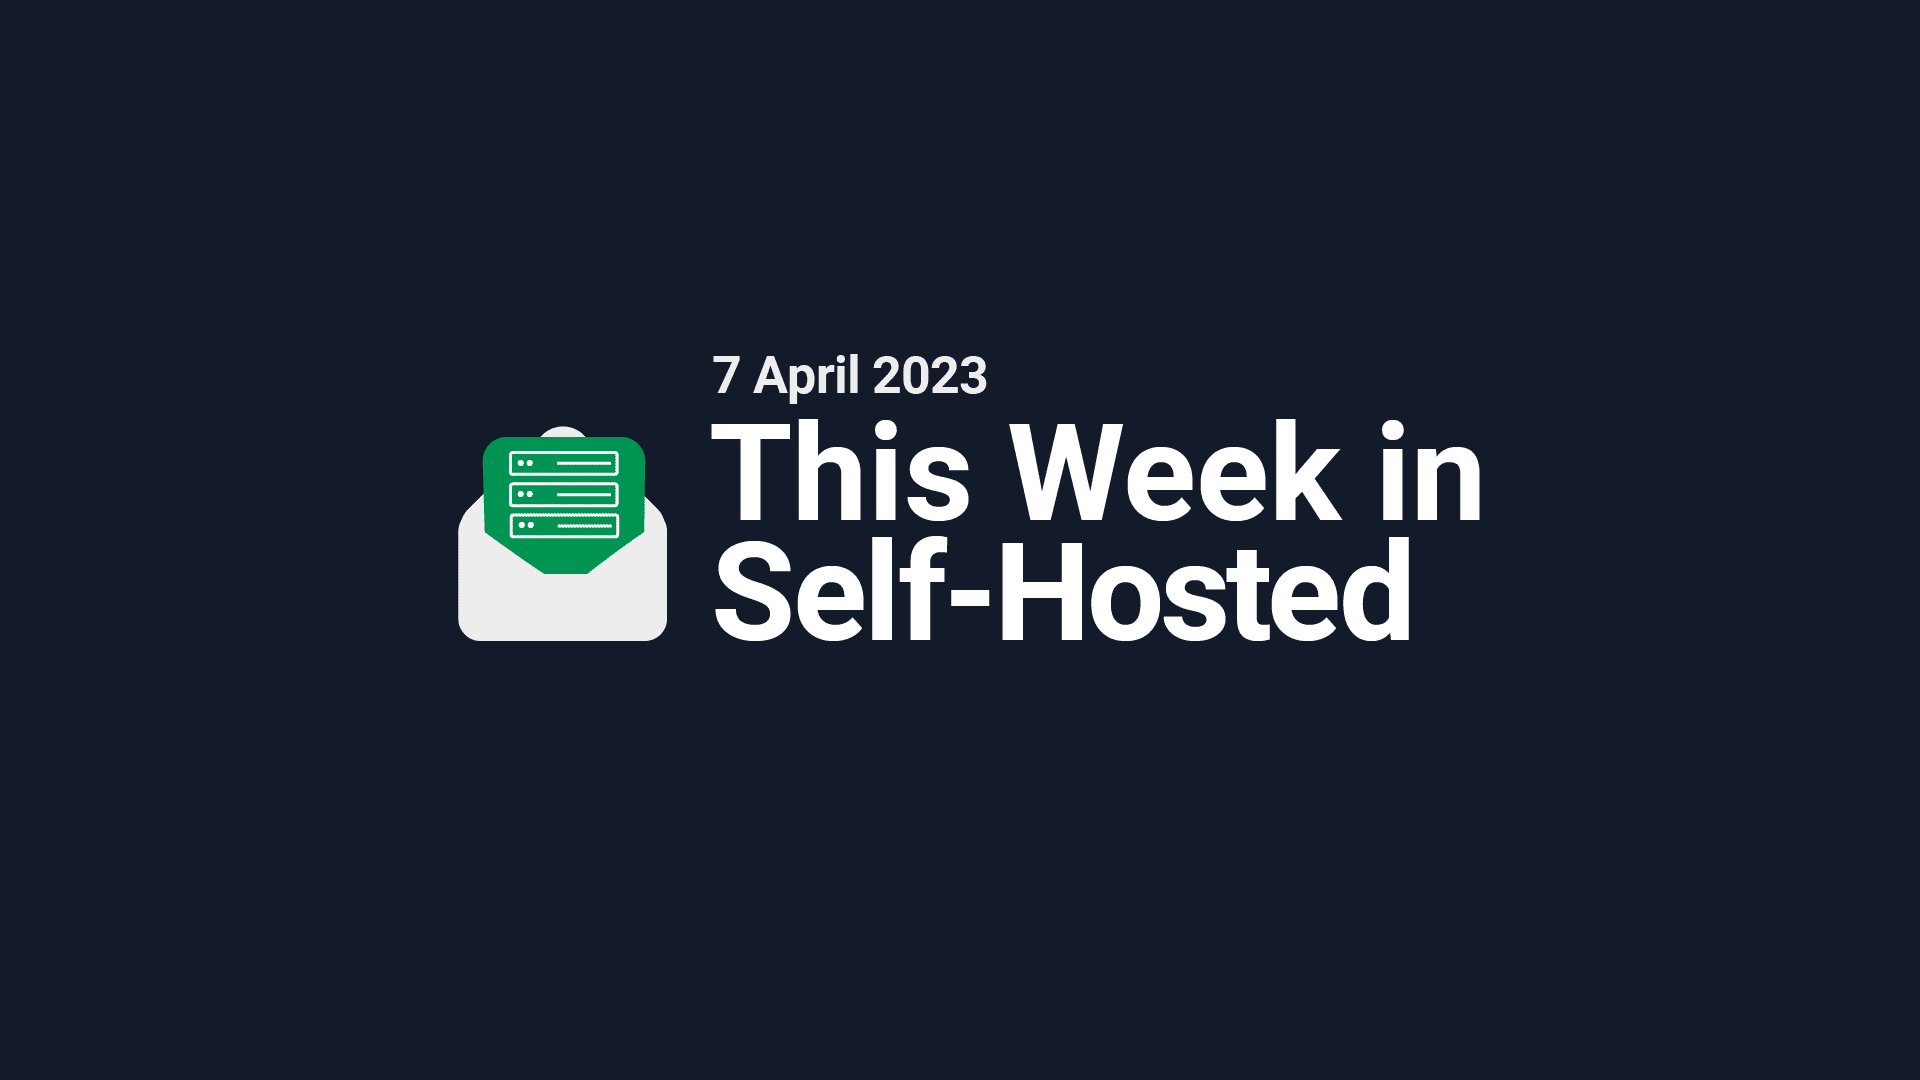 This Week in Self-Hosted (7 April 2023) Post image